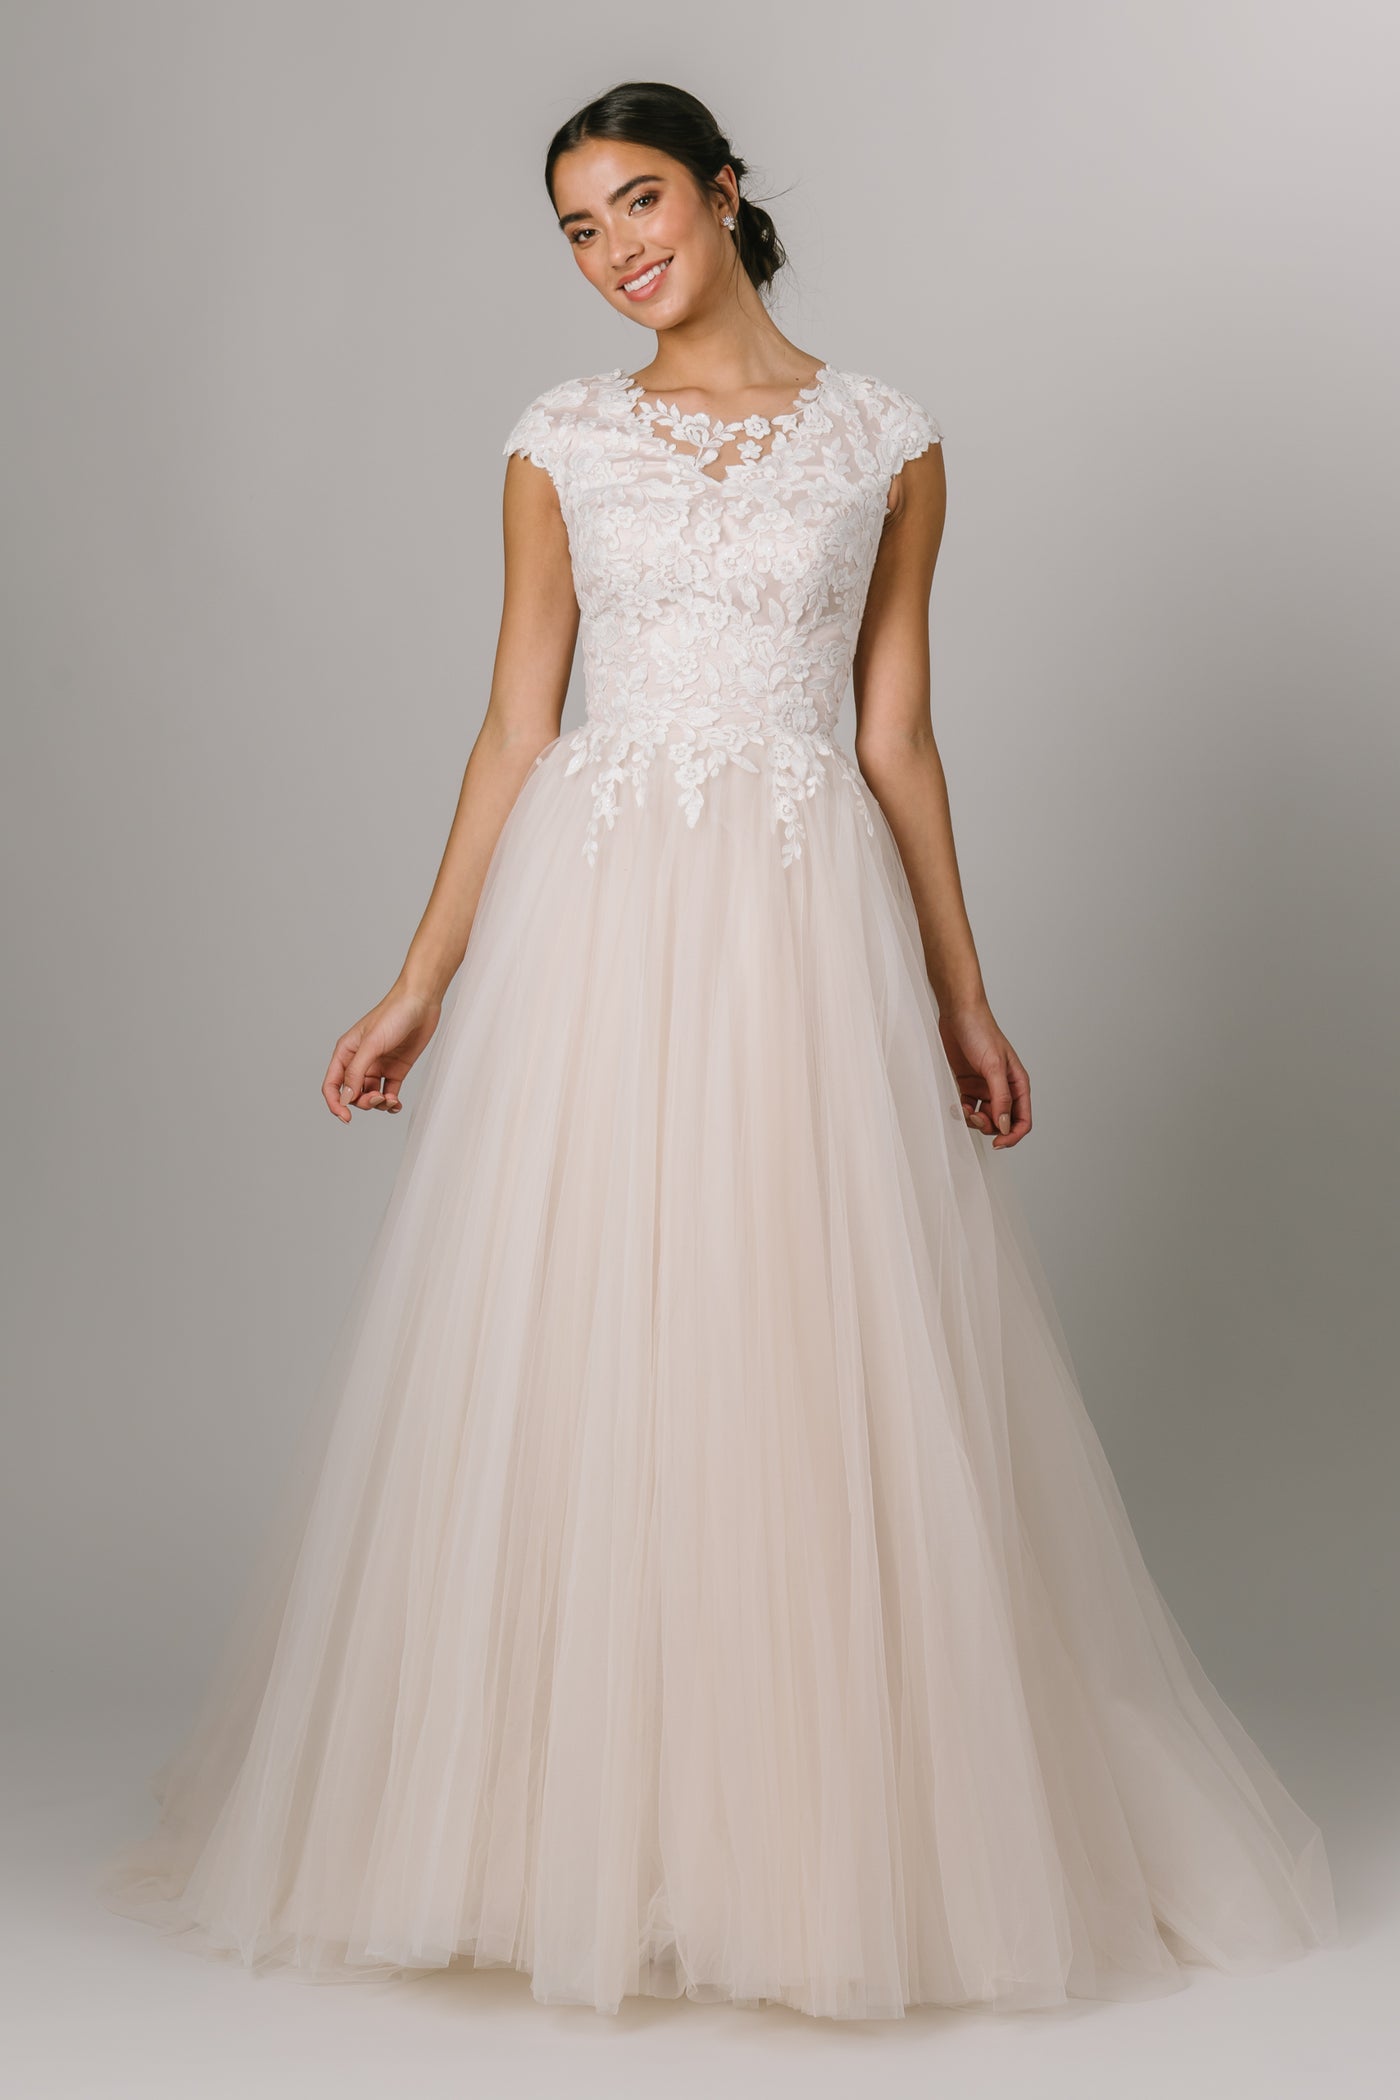 We love this Modest Wedding Dress featuring a lace bodice, illusion neckline and ballgown skirt! - Modest Wedding Dresses - Modest Dresses - Modest Clothing - LatterDayBride